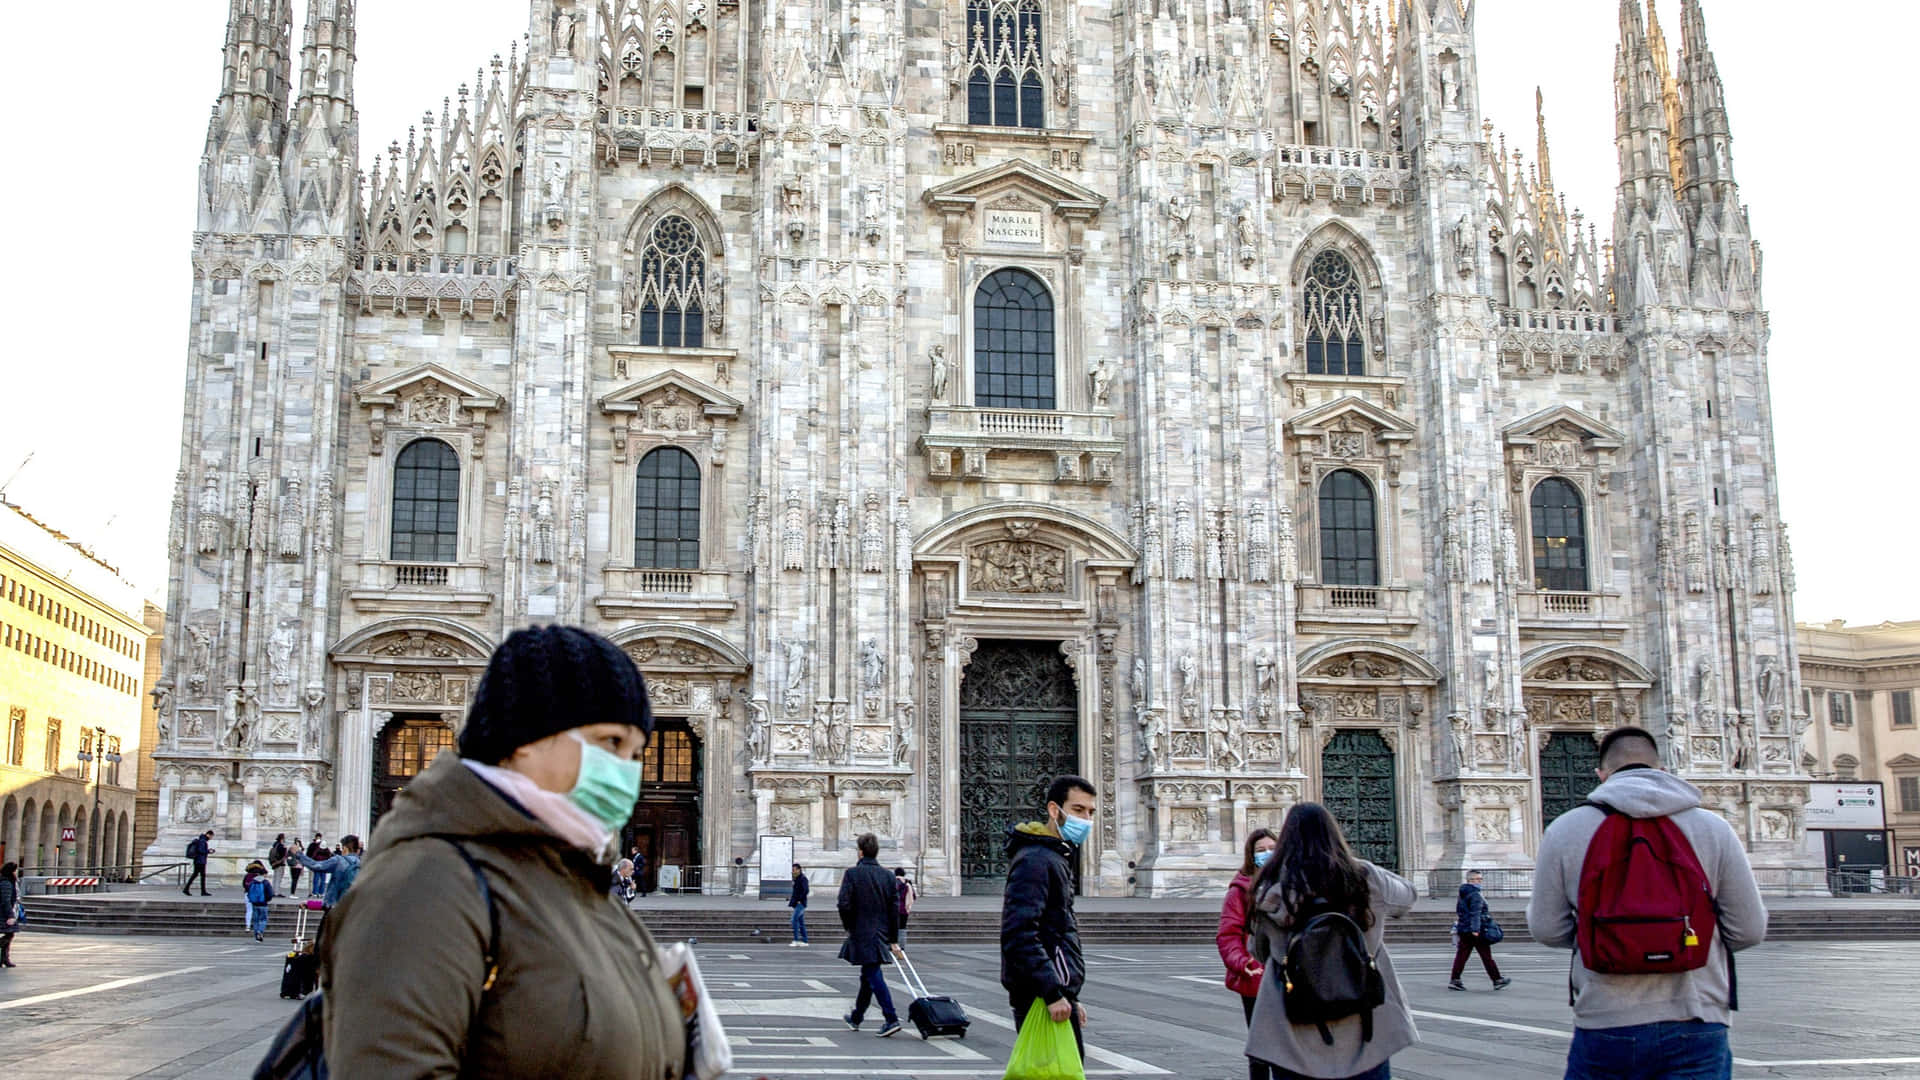 Many People In Milan Cathedral Wallpaper